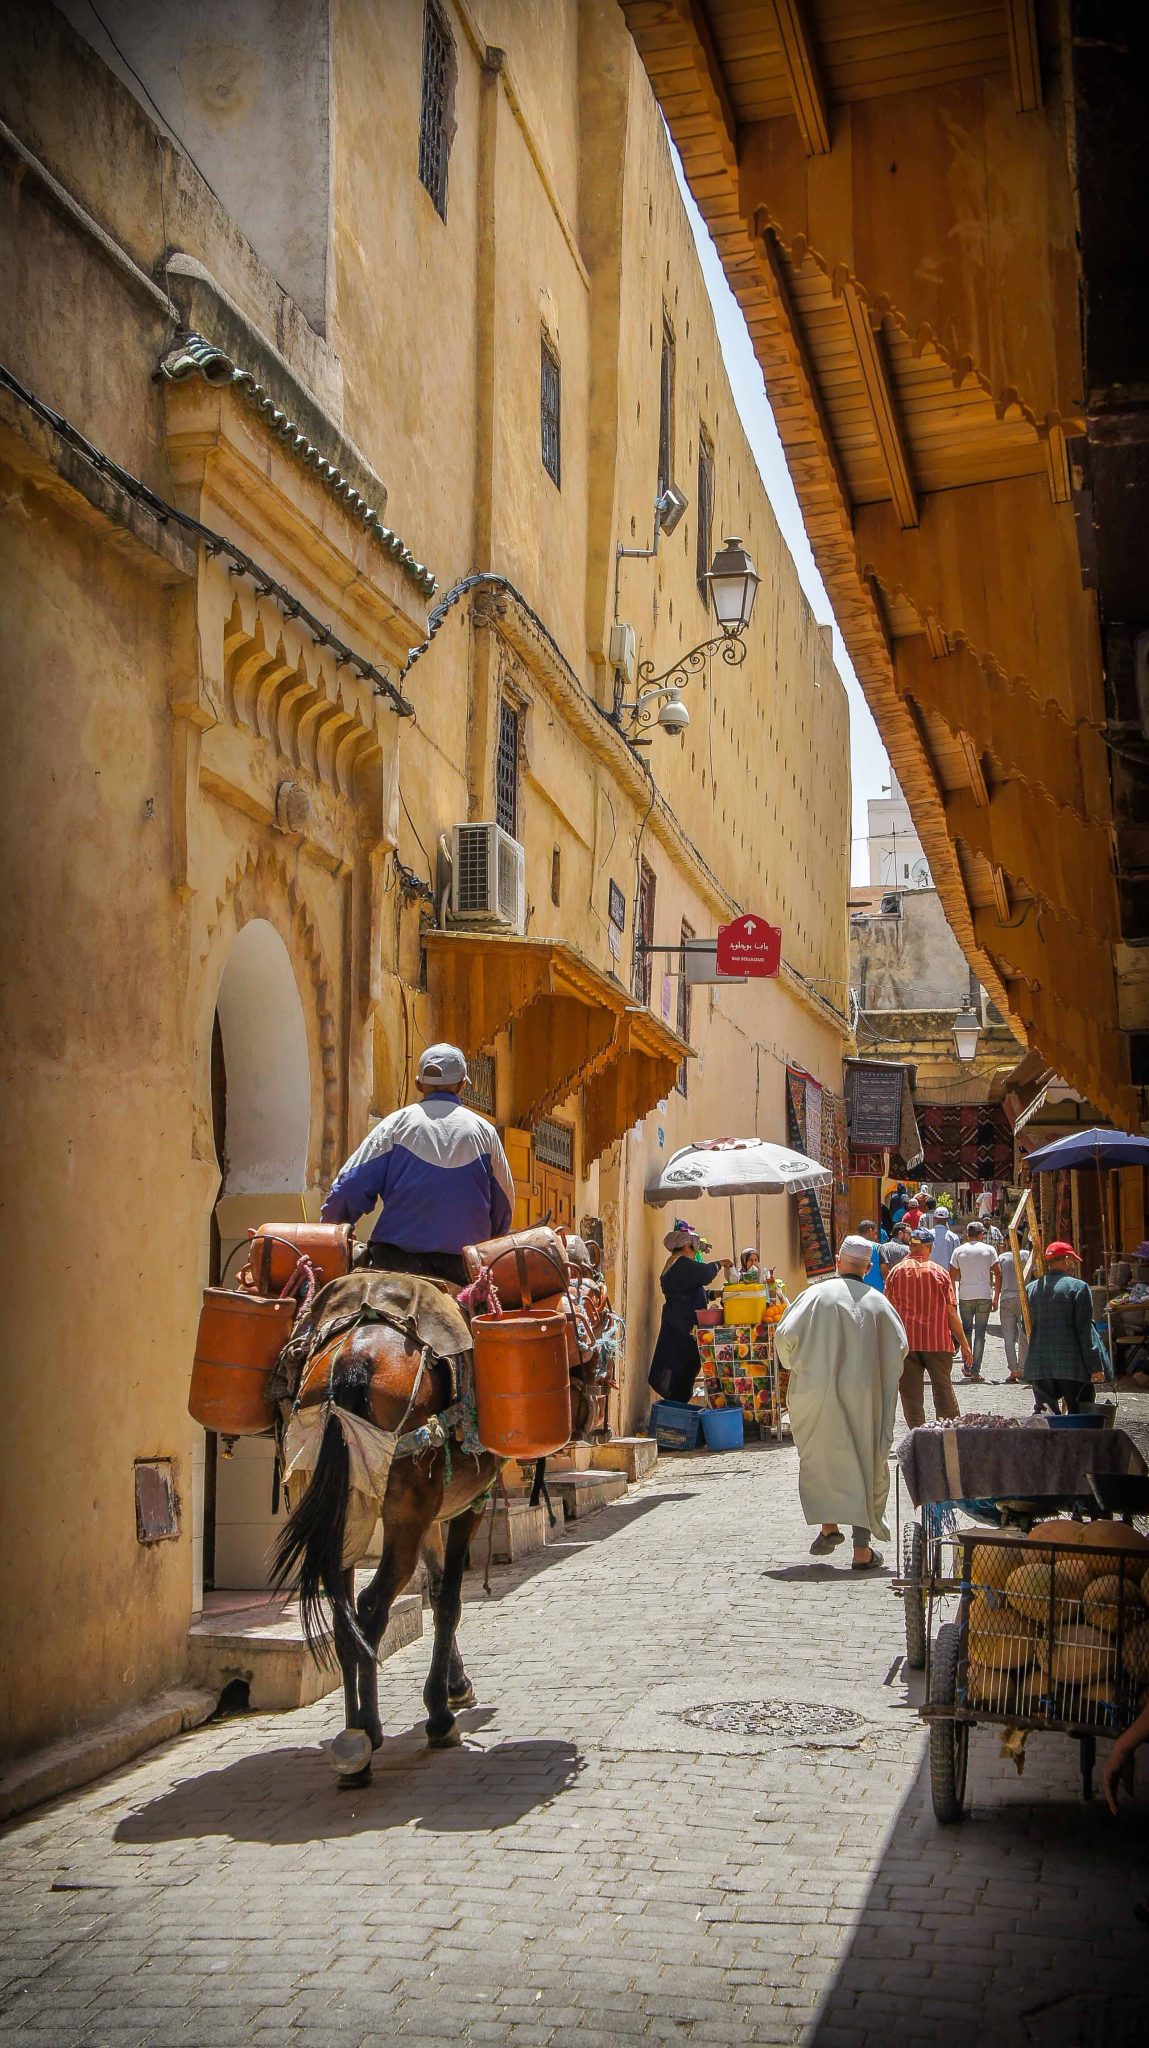 A Moroccan city alley way full of people and life on a Womens Travel Network Morocco Tour For Women